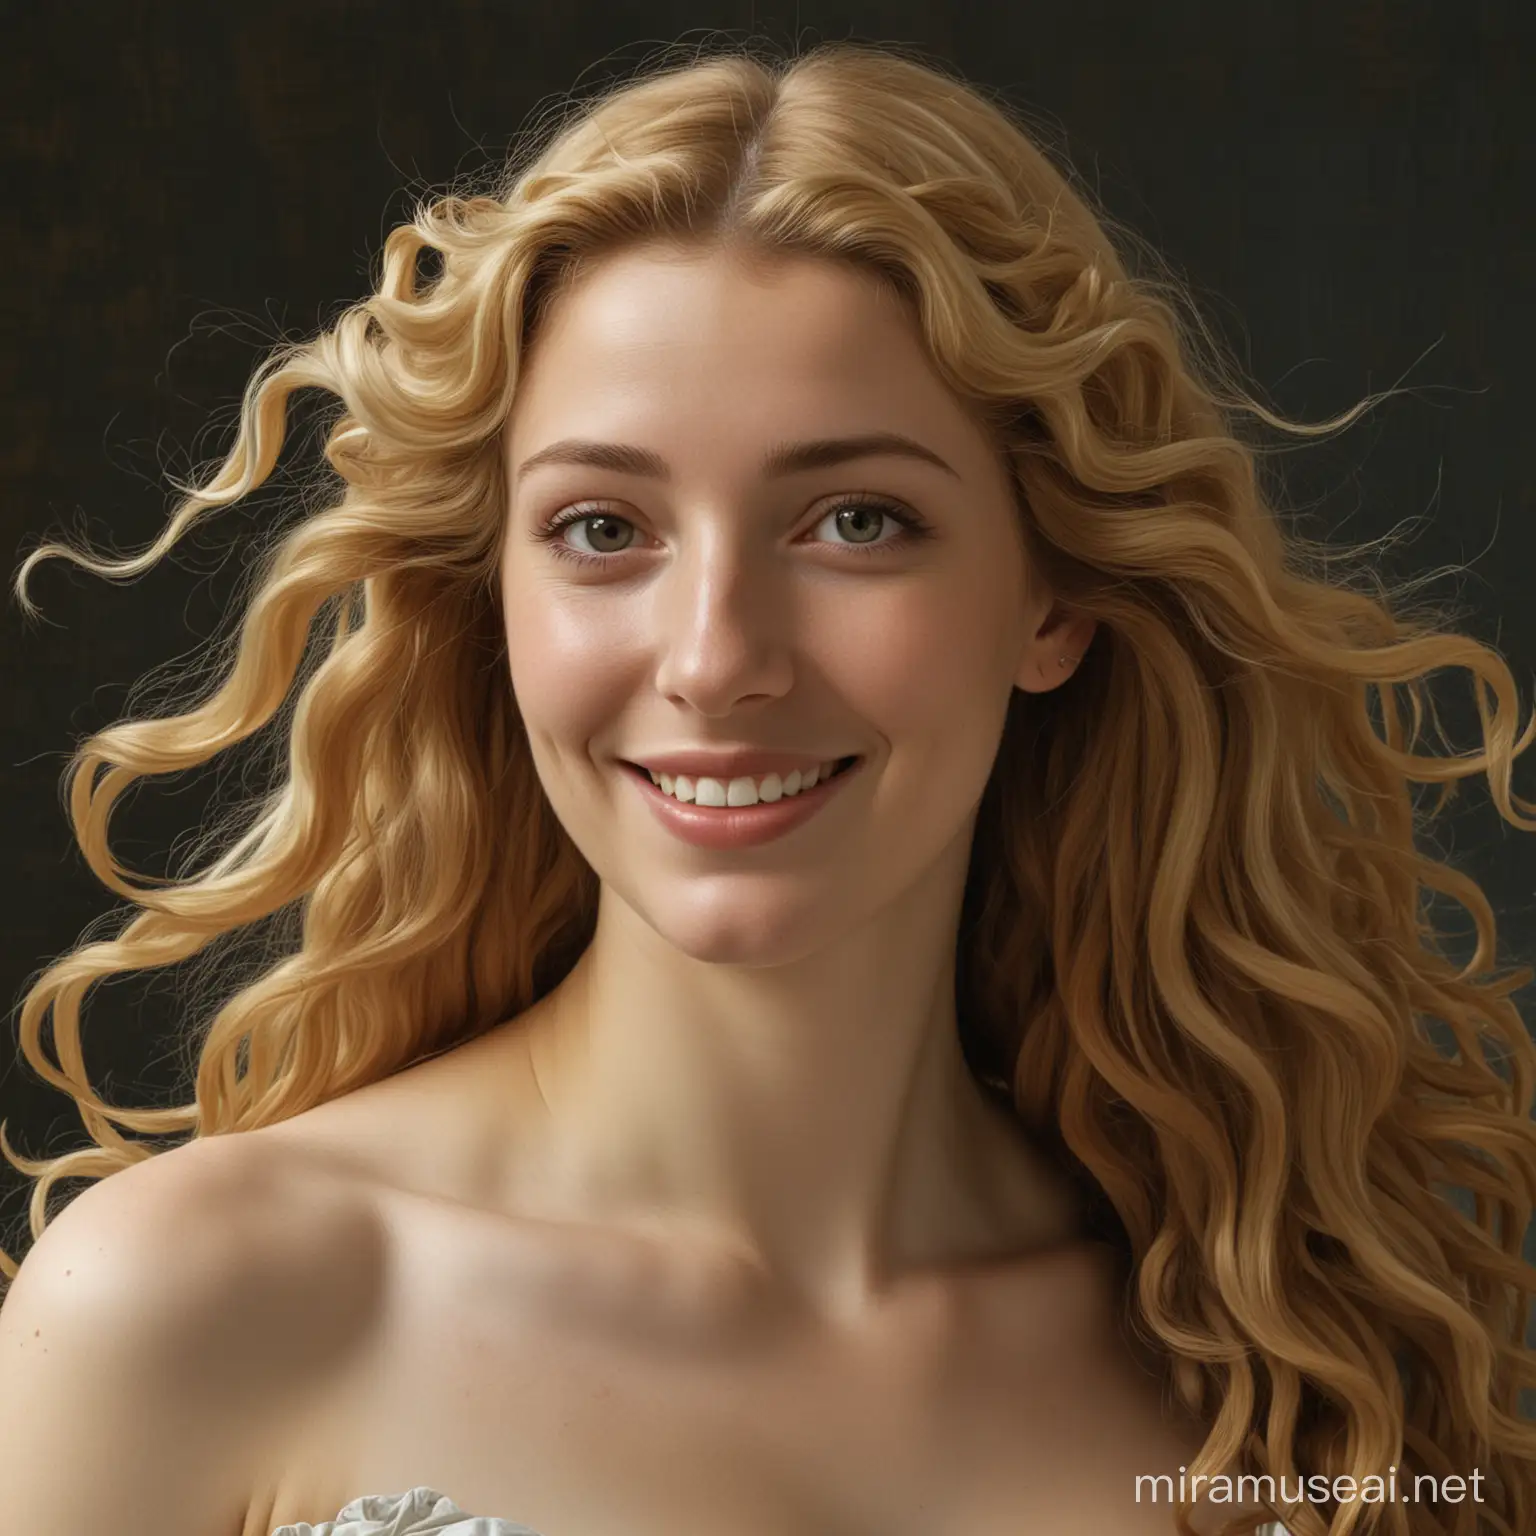 version of Botticelli's Venus, showing a smiling white woman with long dark hair and dark eyes